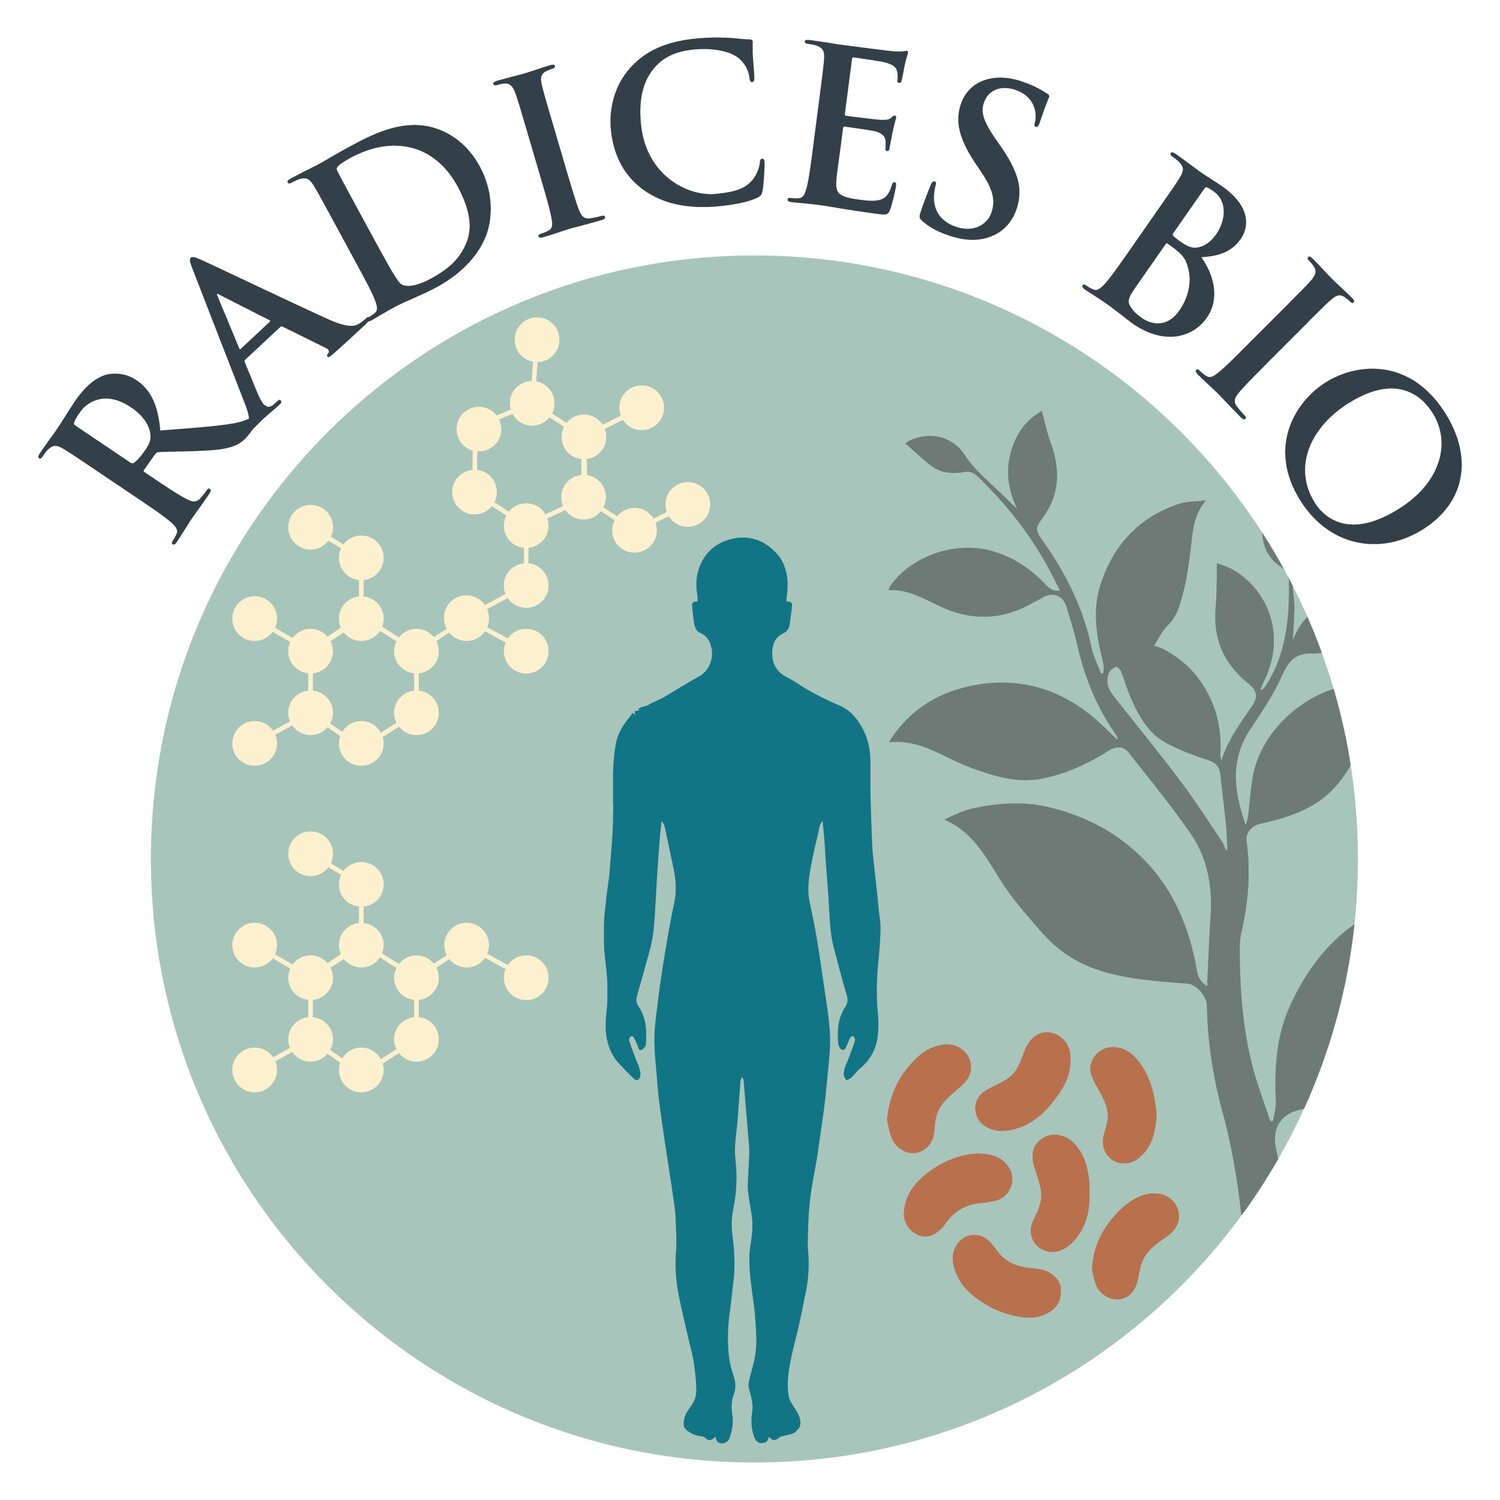 Welcome to Radices Bio